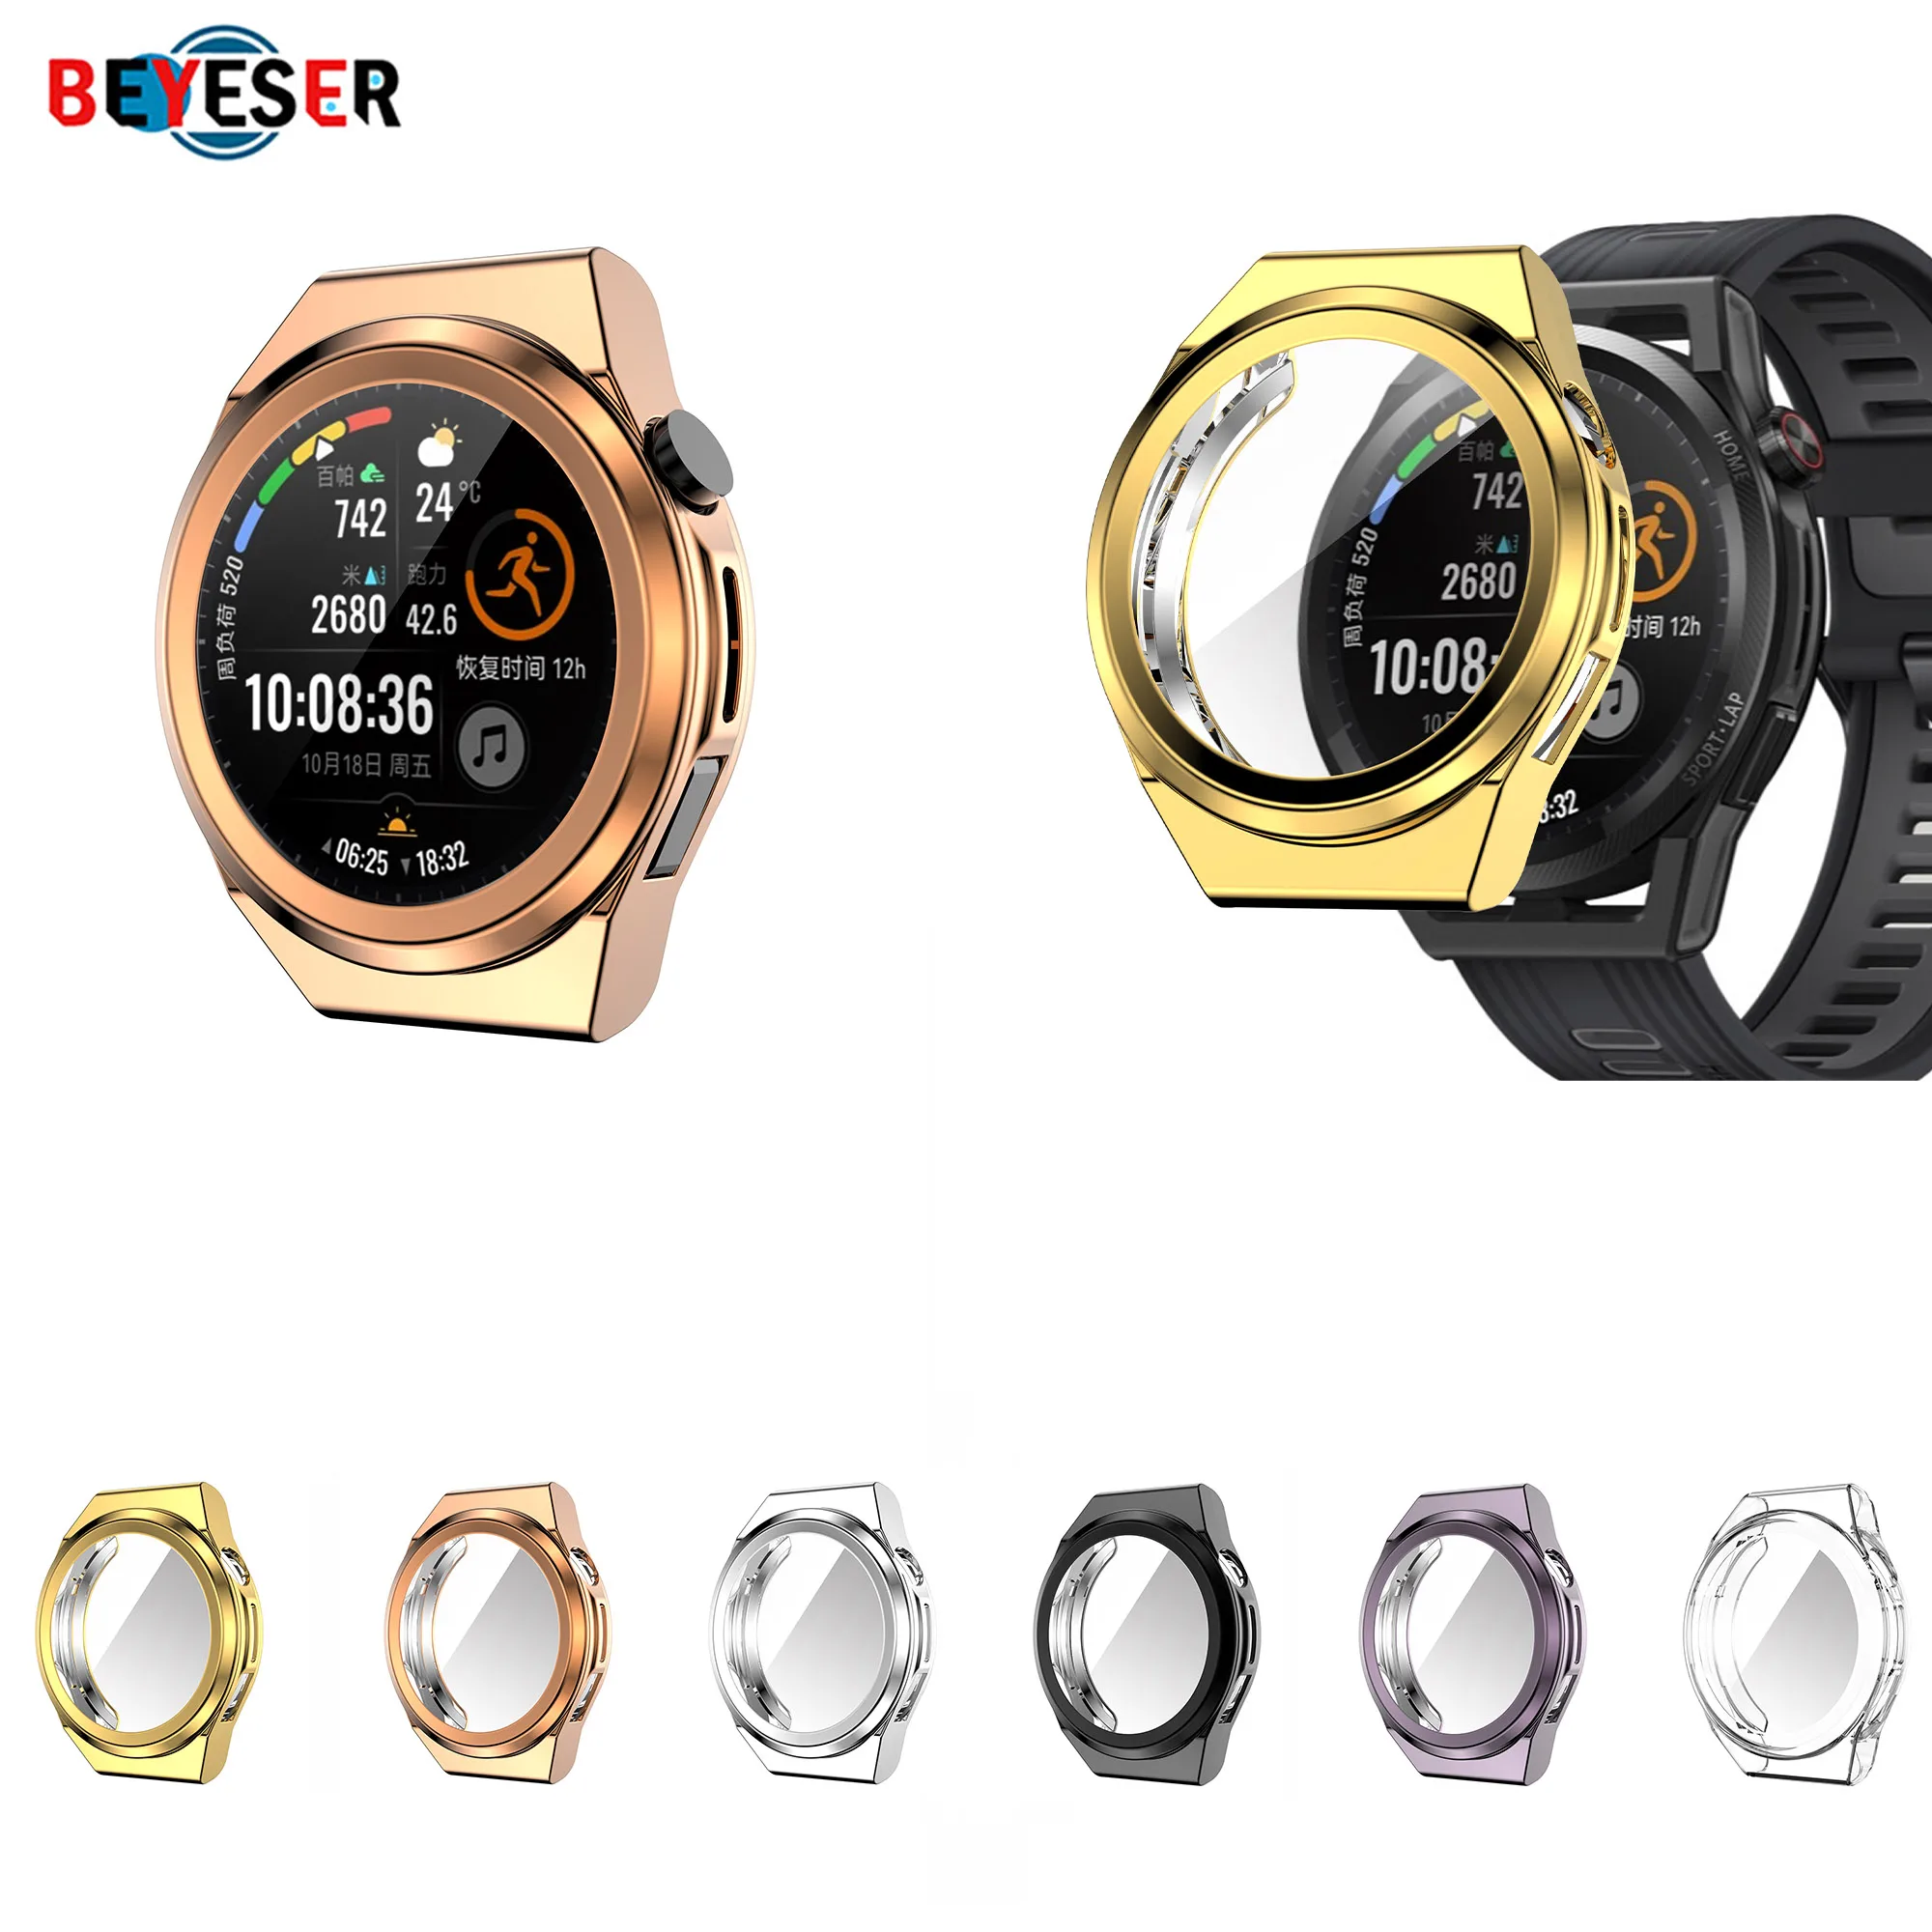 

Watch Case For Huawei GT Runner TPU All Cover Protective Case Smart Watch Anti-drop Scratch Resistant Replacement Protect Cover